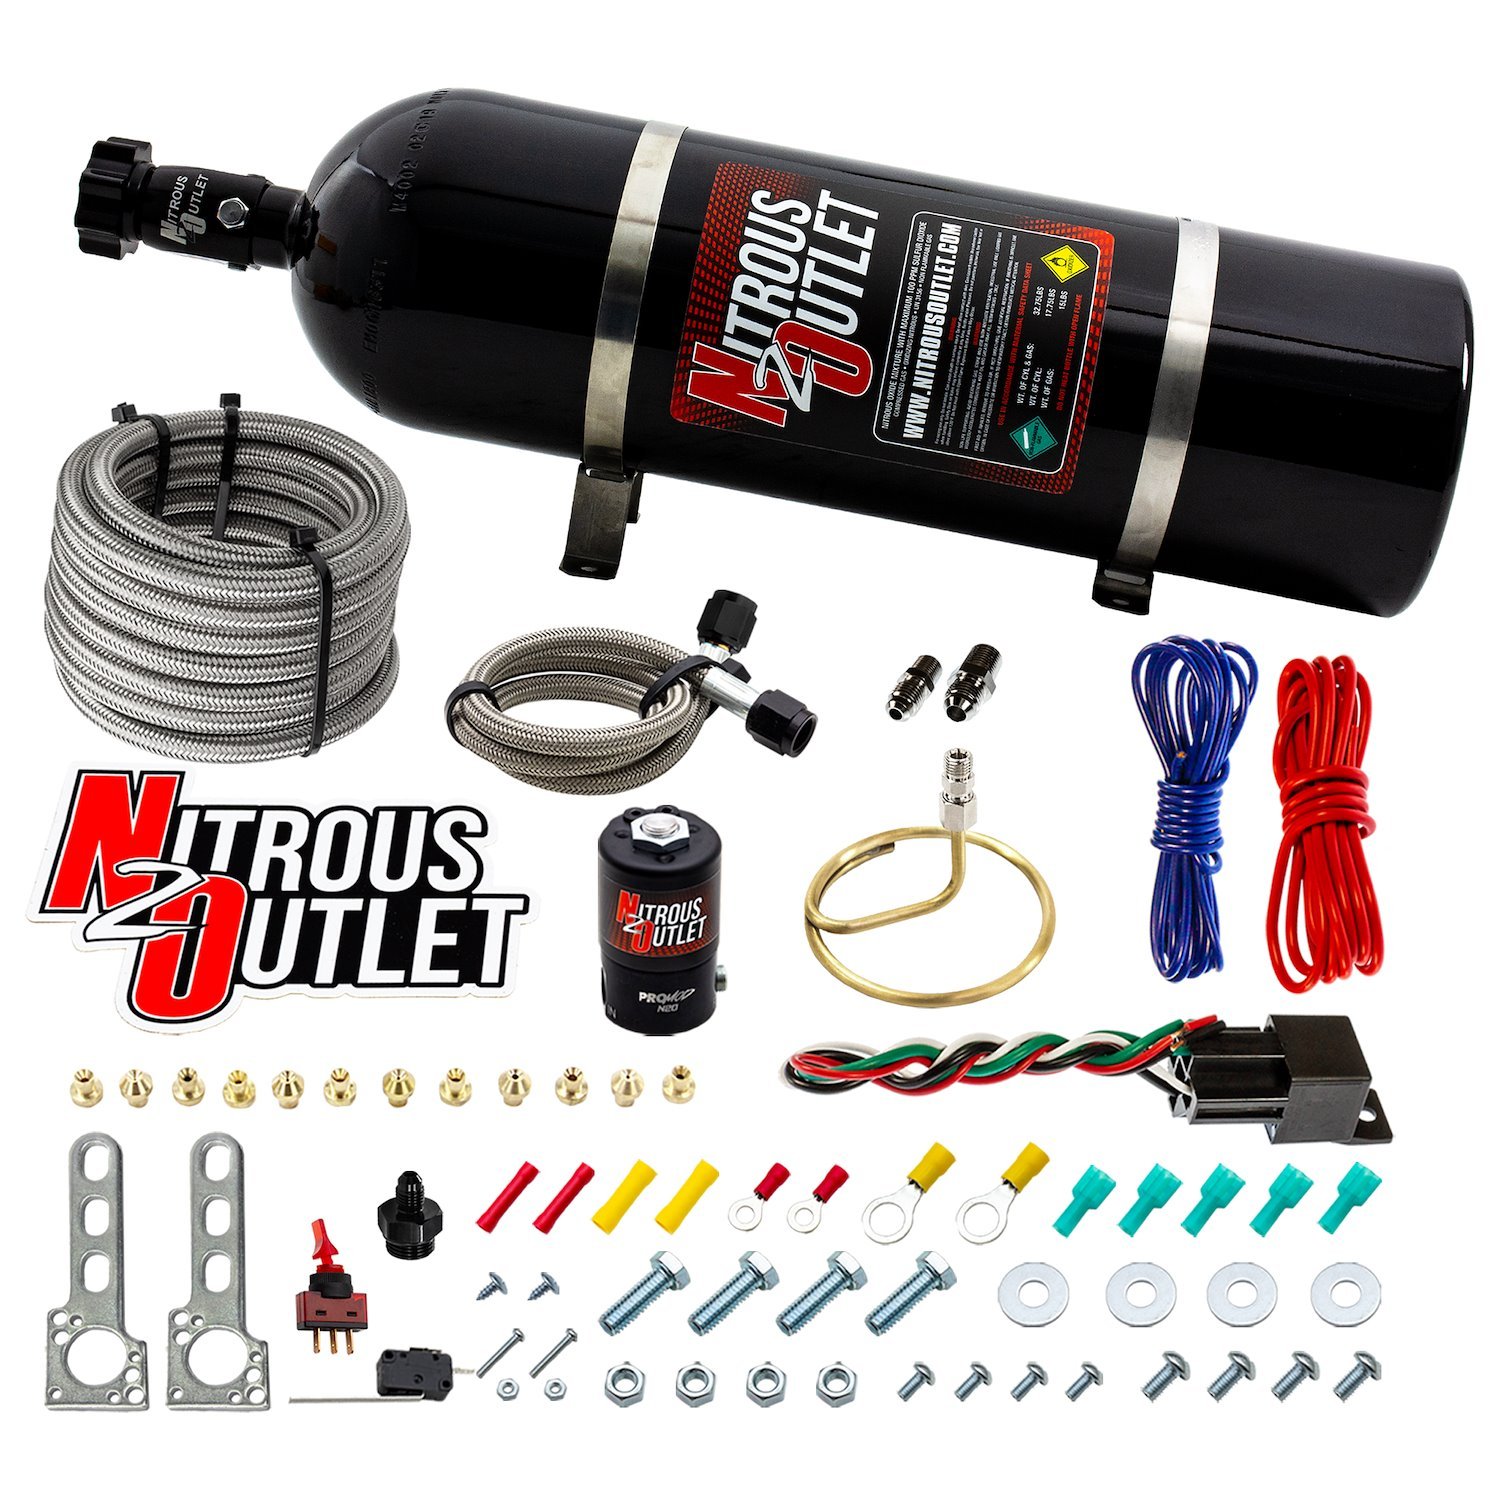 00-10202-15 Universal EFI Dry Small Distribution Ring System, 35-200HP, 15lb Bottle